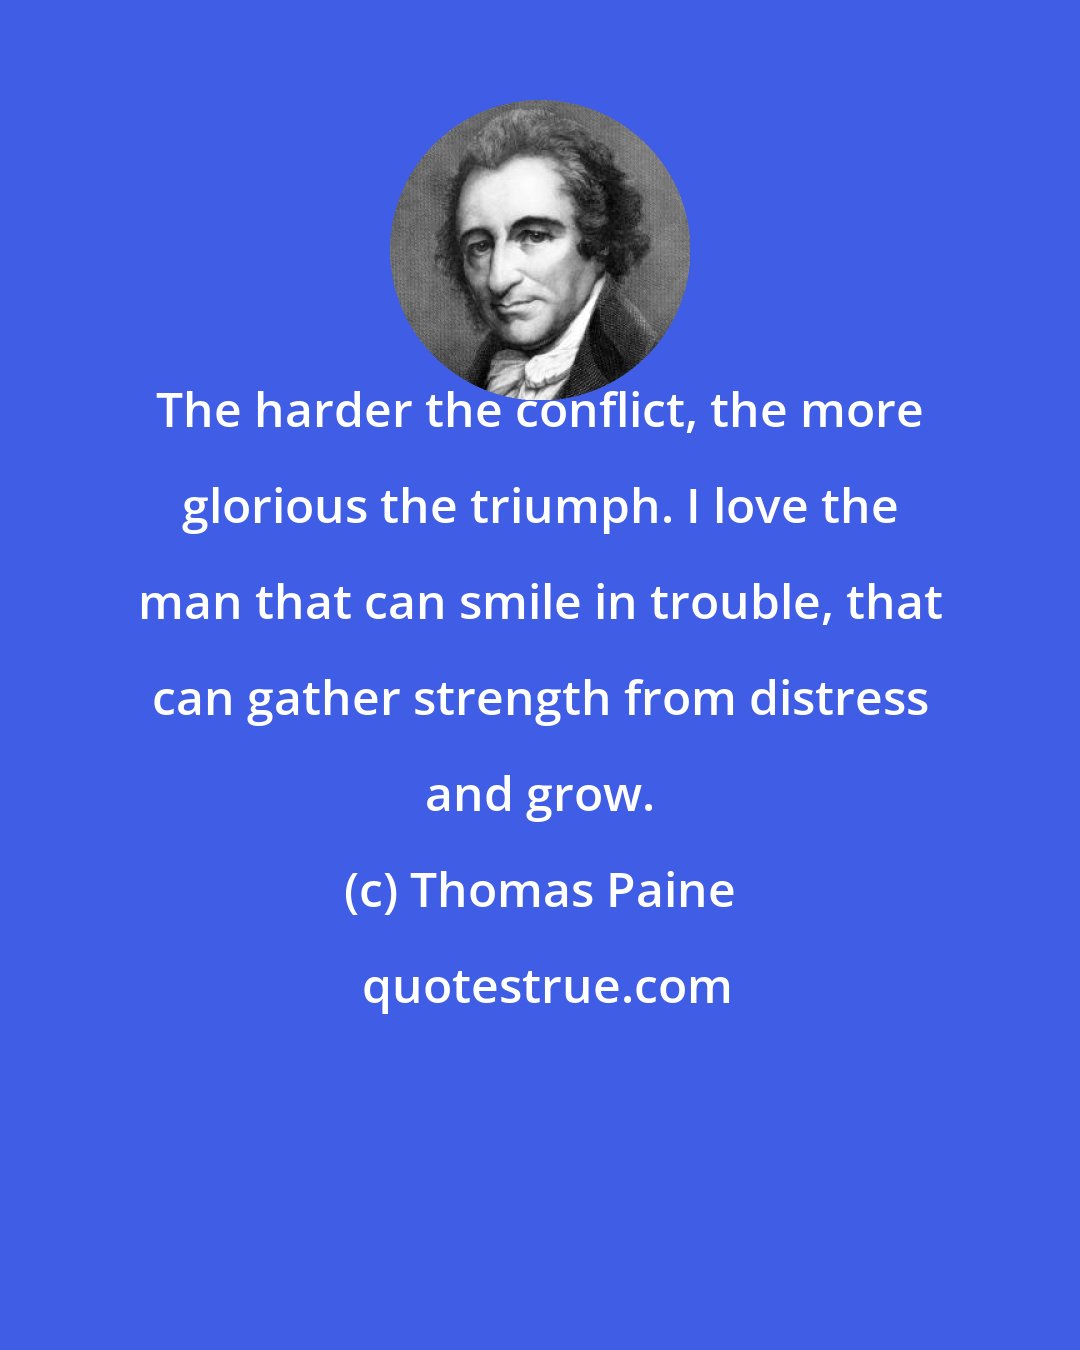 Thomas Paine: The harder the conflict, the more glorious the triumph. I love the man that can smile in trouble, that can gather strength from distress and grow.